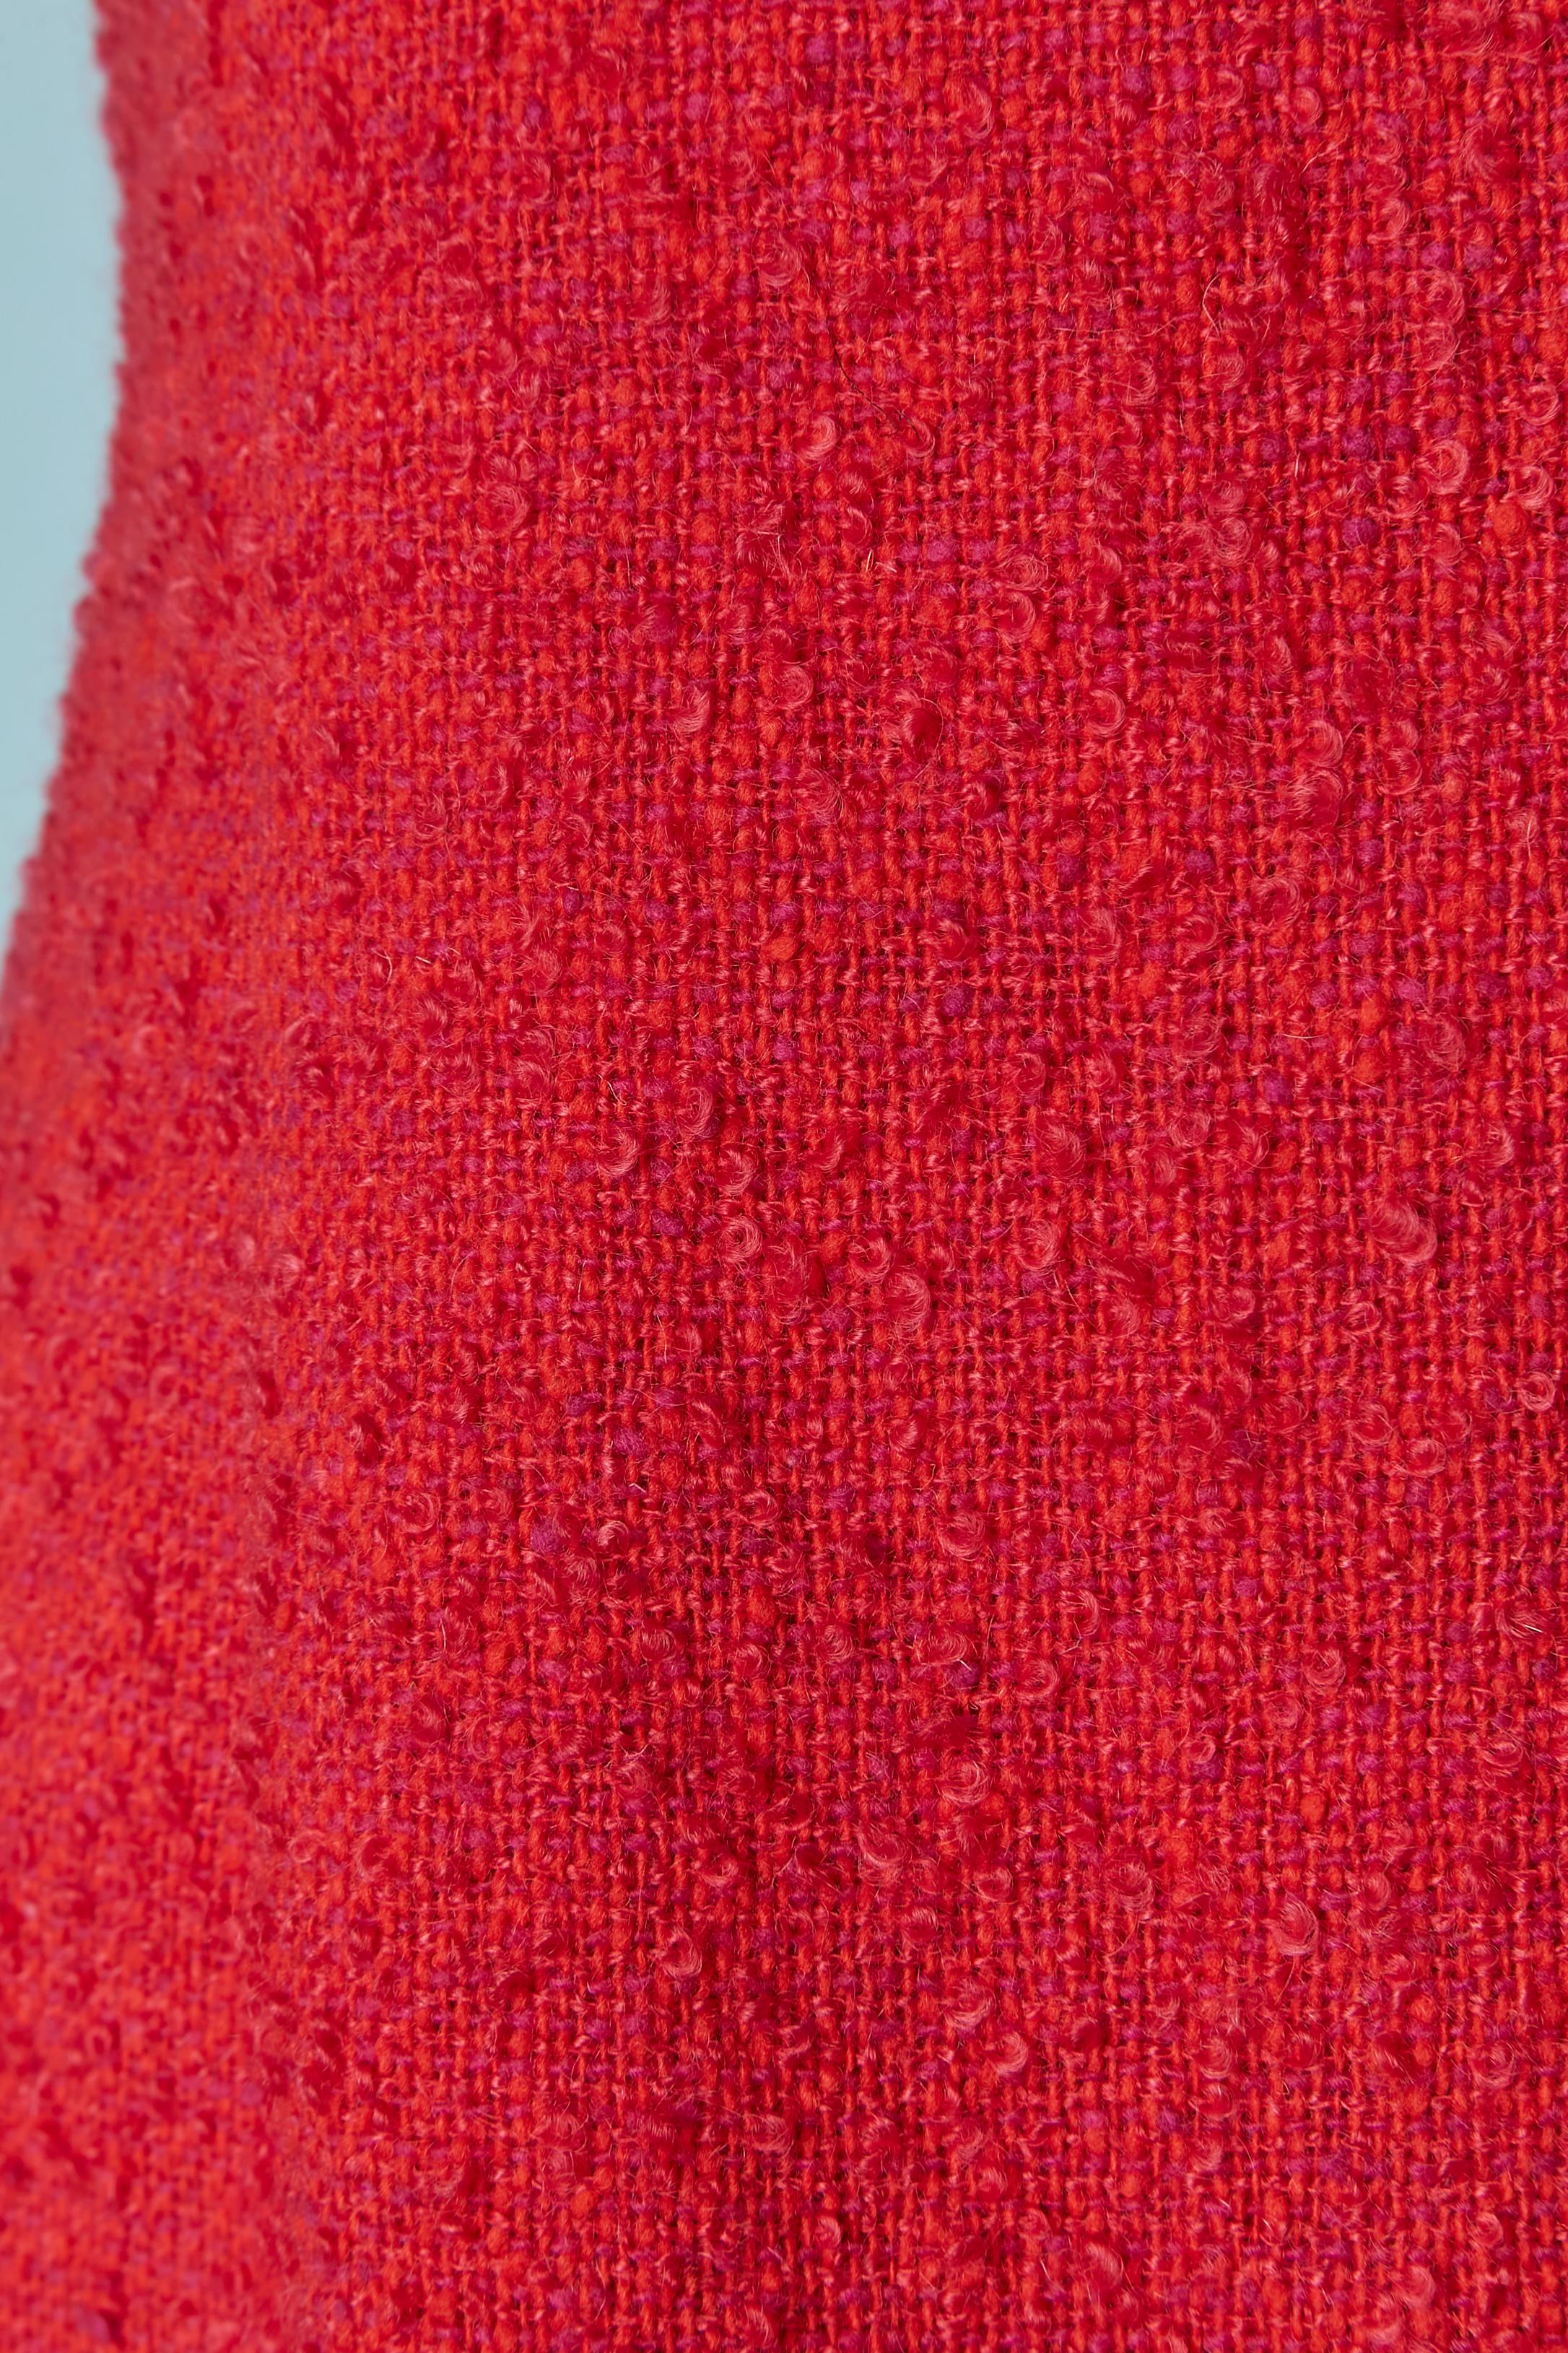 Red tweed bouclette sleeveless dress Versus By Gianni Versace In Excellent Condition For Sale In Saint-Ouen-Sur-Seine, FR